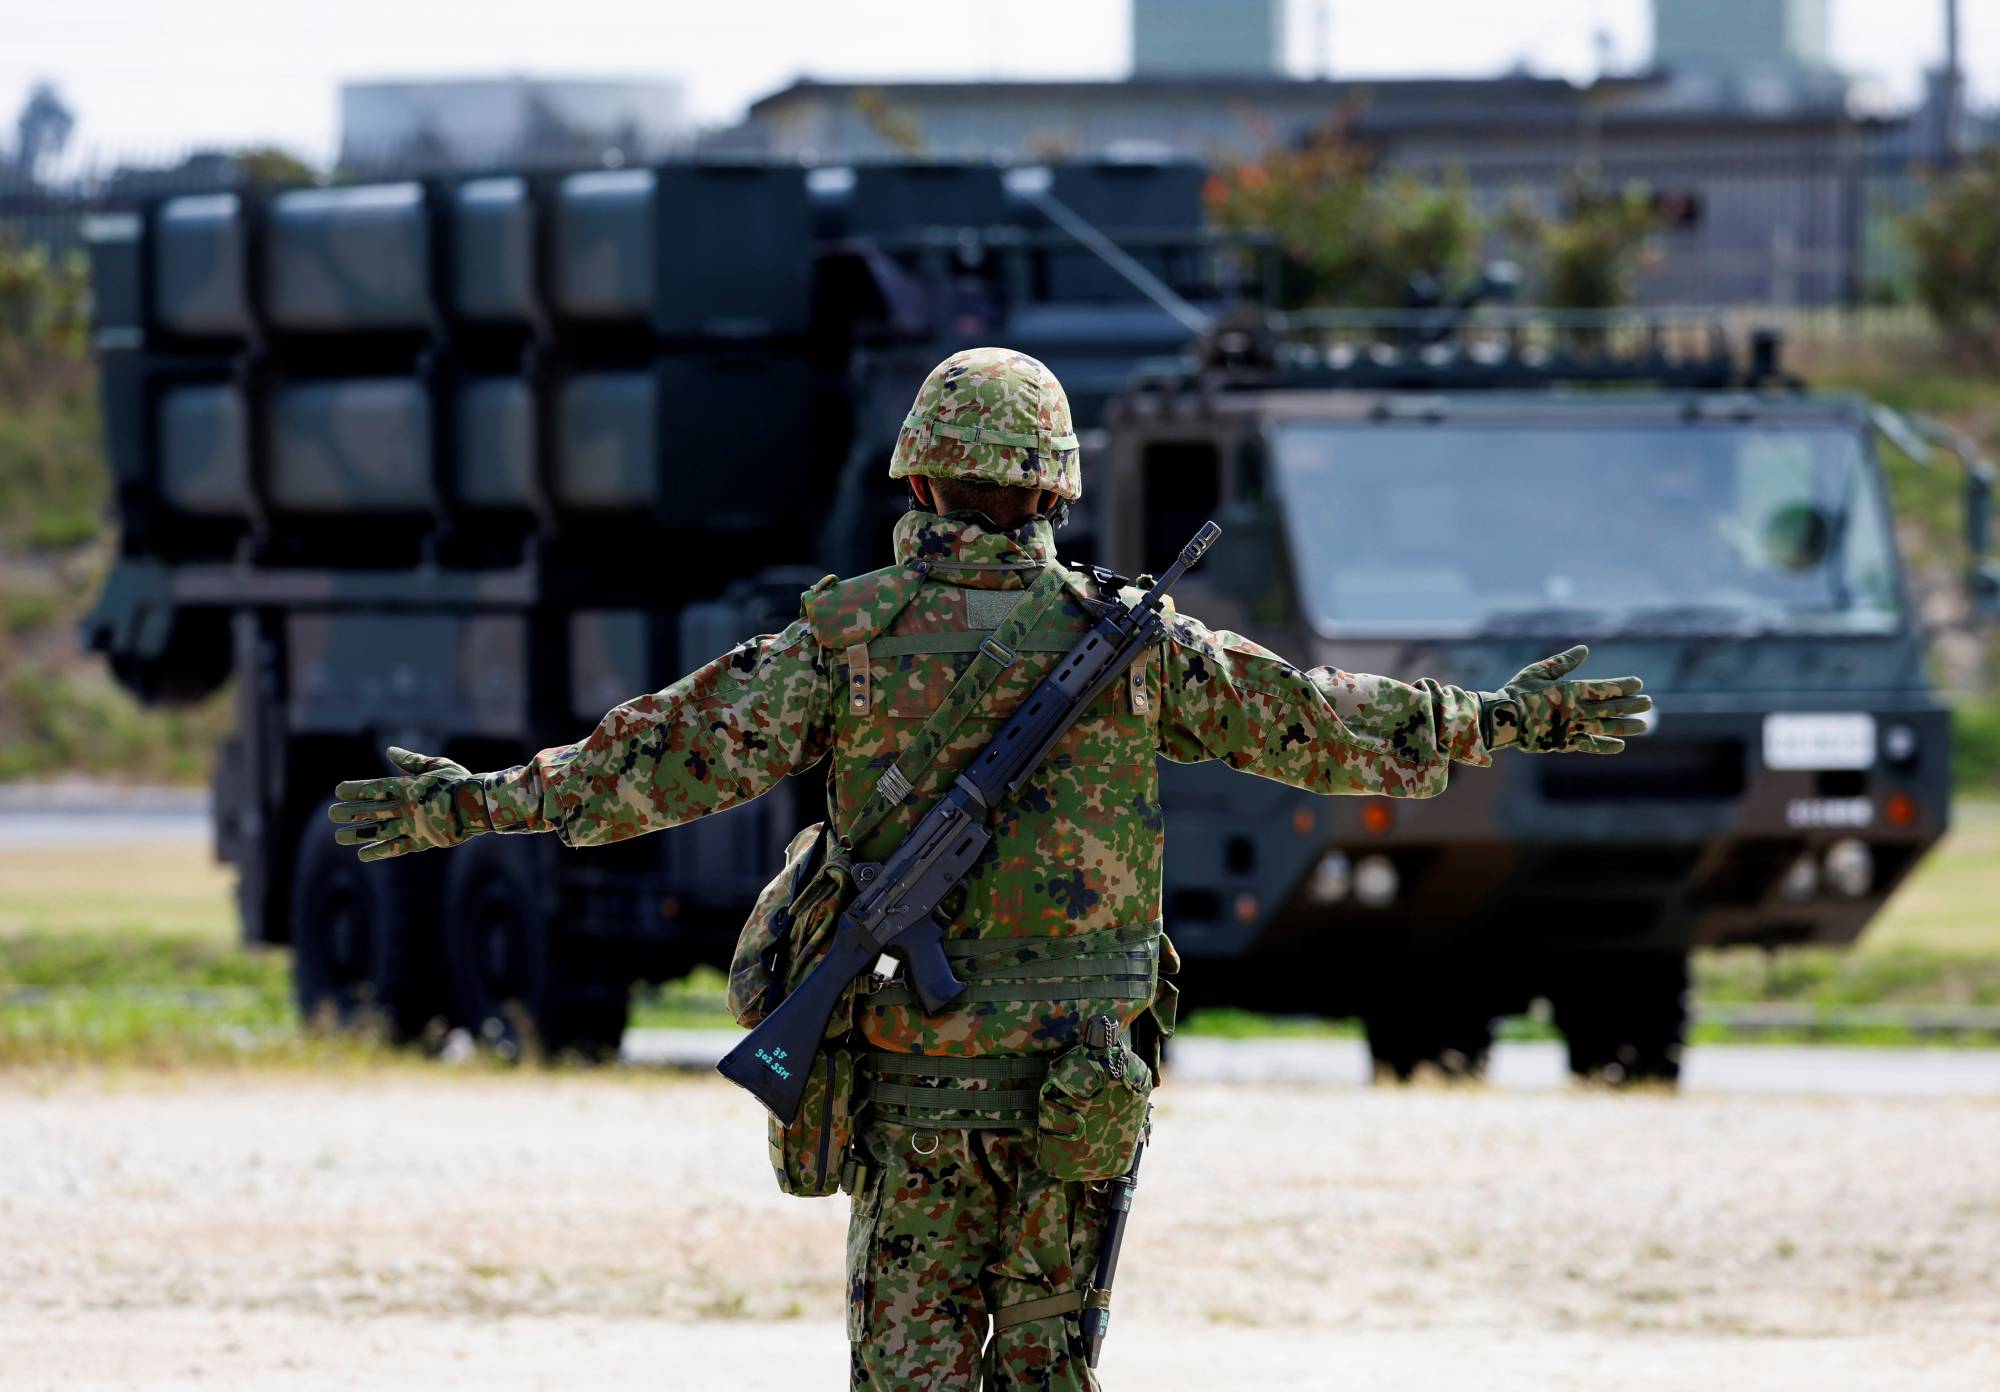 A Ground Self-Defense Force member conducts a military drill with an anti-ship missile unit, at the GSDF camp on Miyako Island in Okinawa Prefecture in April. | REUTERS